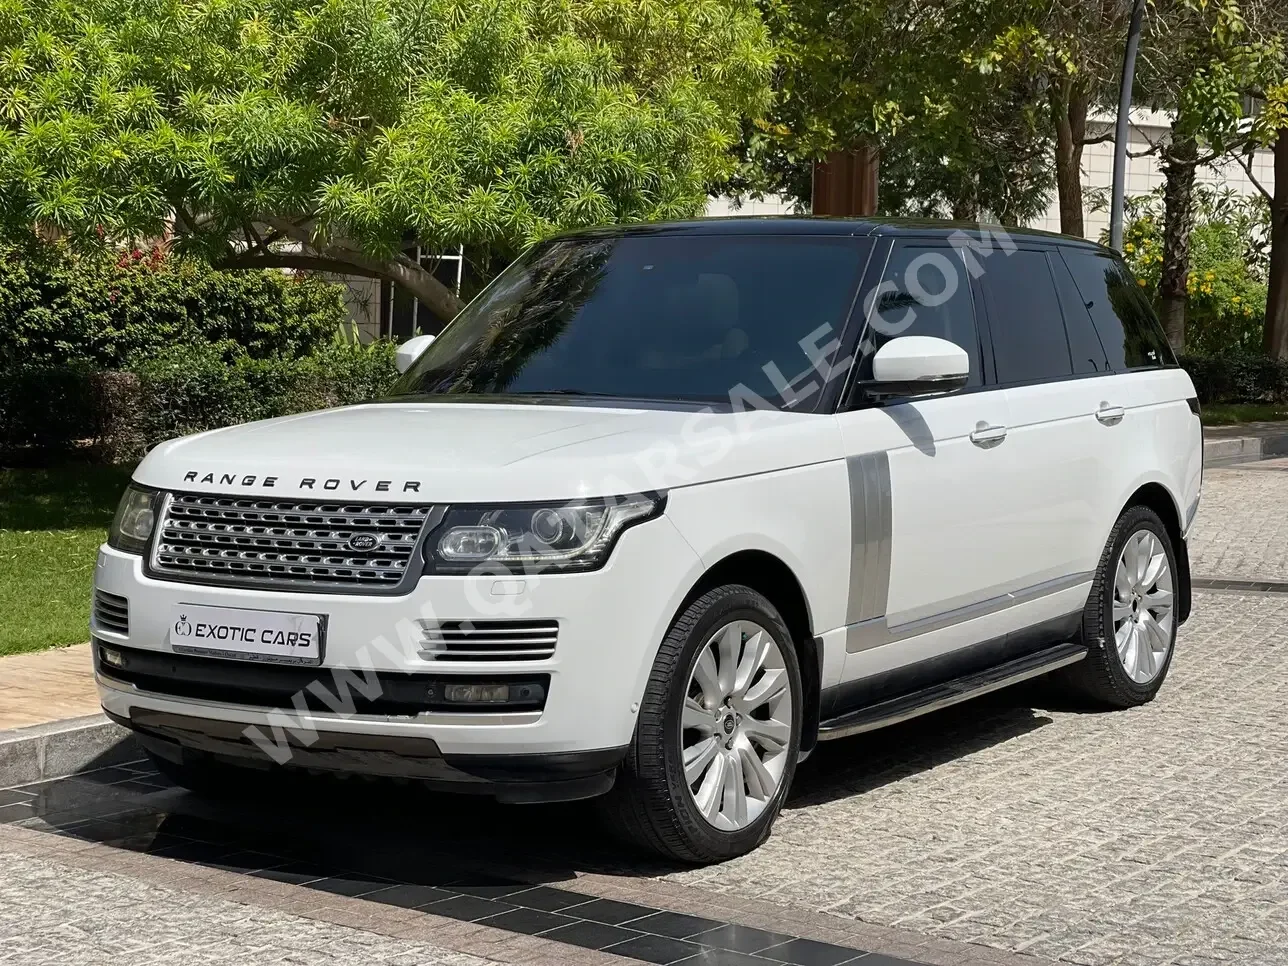 Land Rover  Range Rover  Vogue SE  2013  Automatic  167,000 Km  8 Cylinder  Four Wheel Drive (4WD)  SUV  White